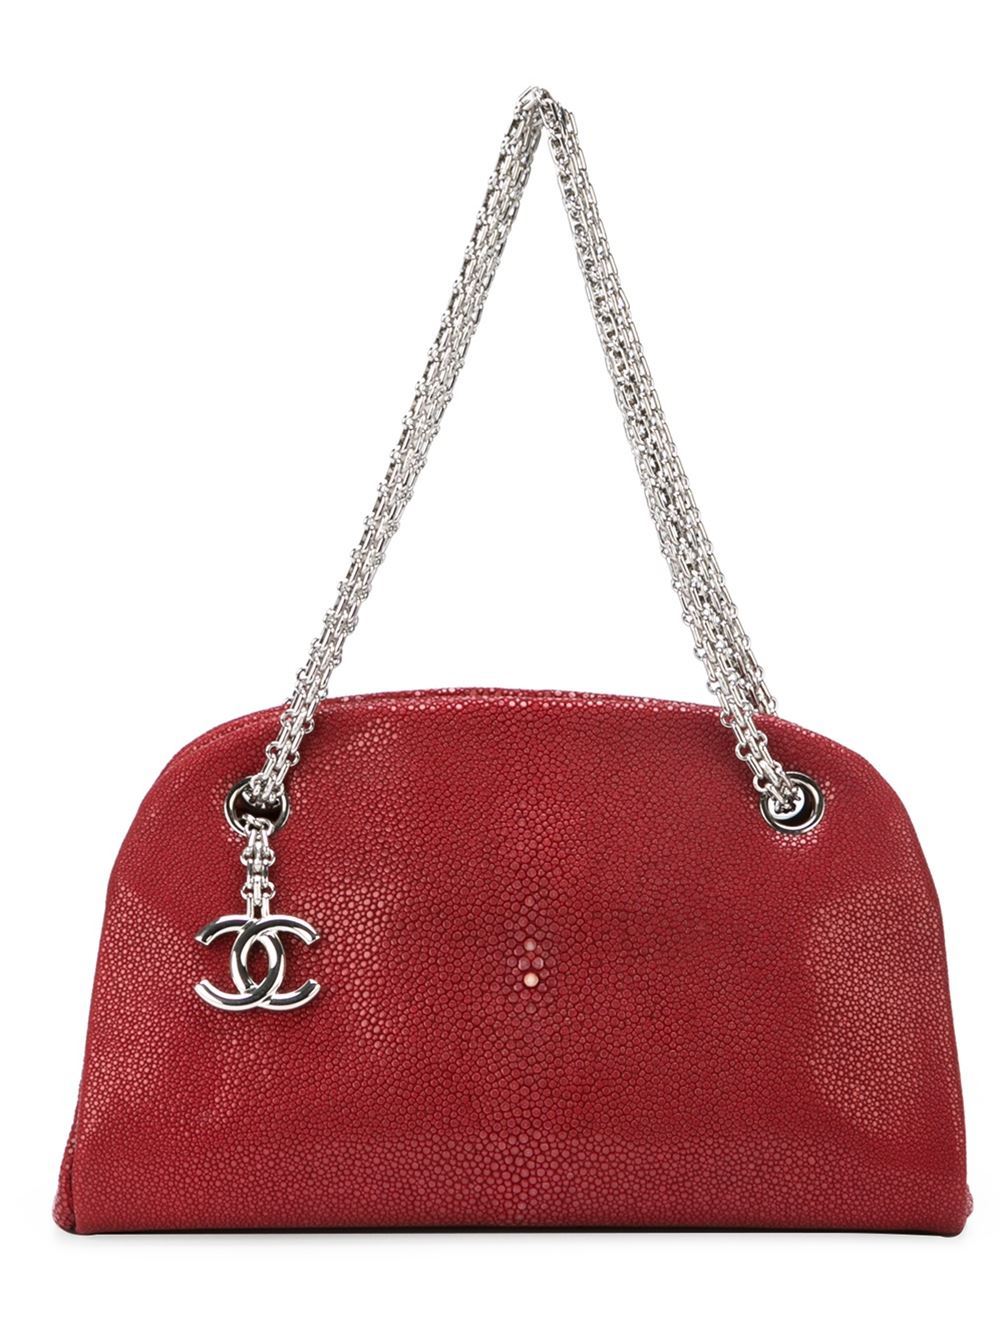 This red stingray half moon tote from Chanel features an open top design, a chain shoulder strap, a logo charm, an internal zipped pocket, an internal slip pocket, an internal framed compartment and a logo plaque clasp fastening. 

Colour: